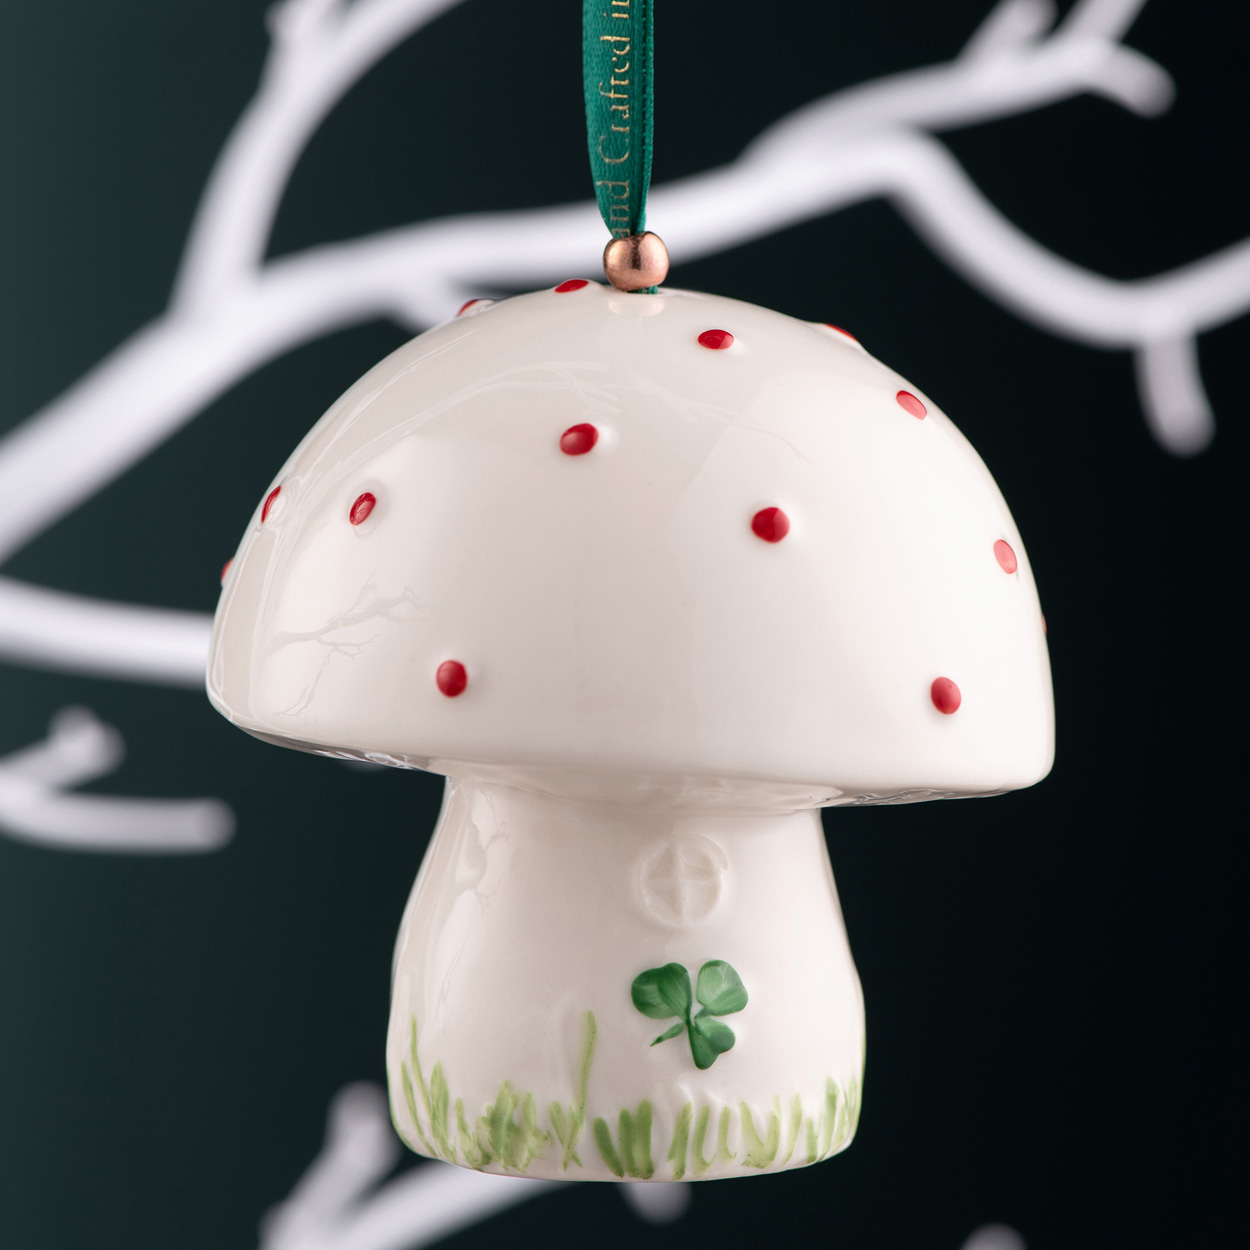 Product image for Irish Christmas | Belleek Pottery Toadstool Ornament